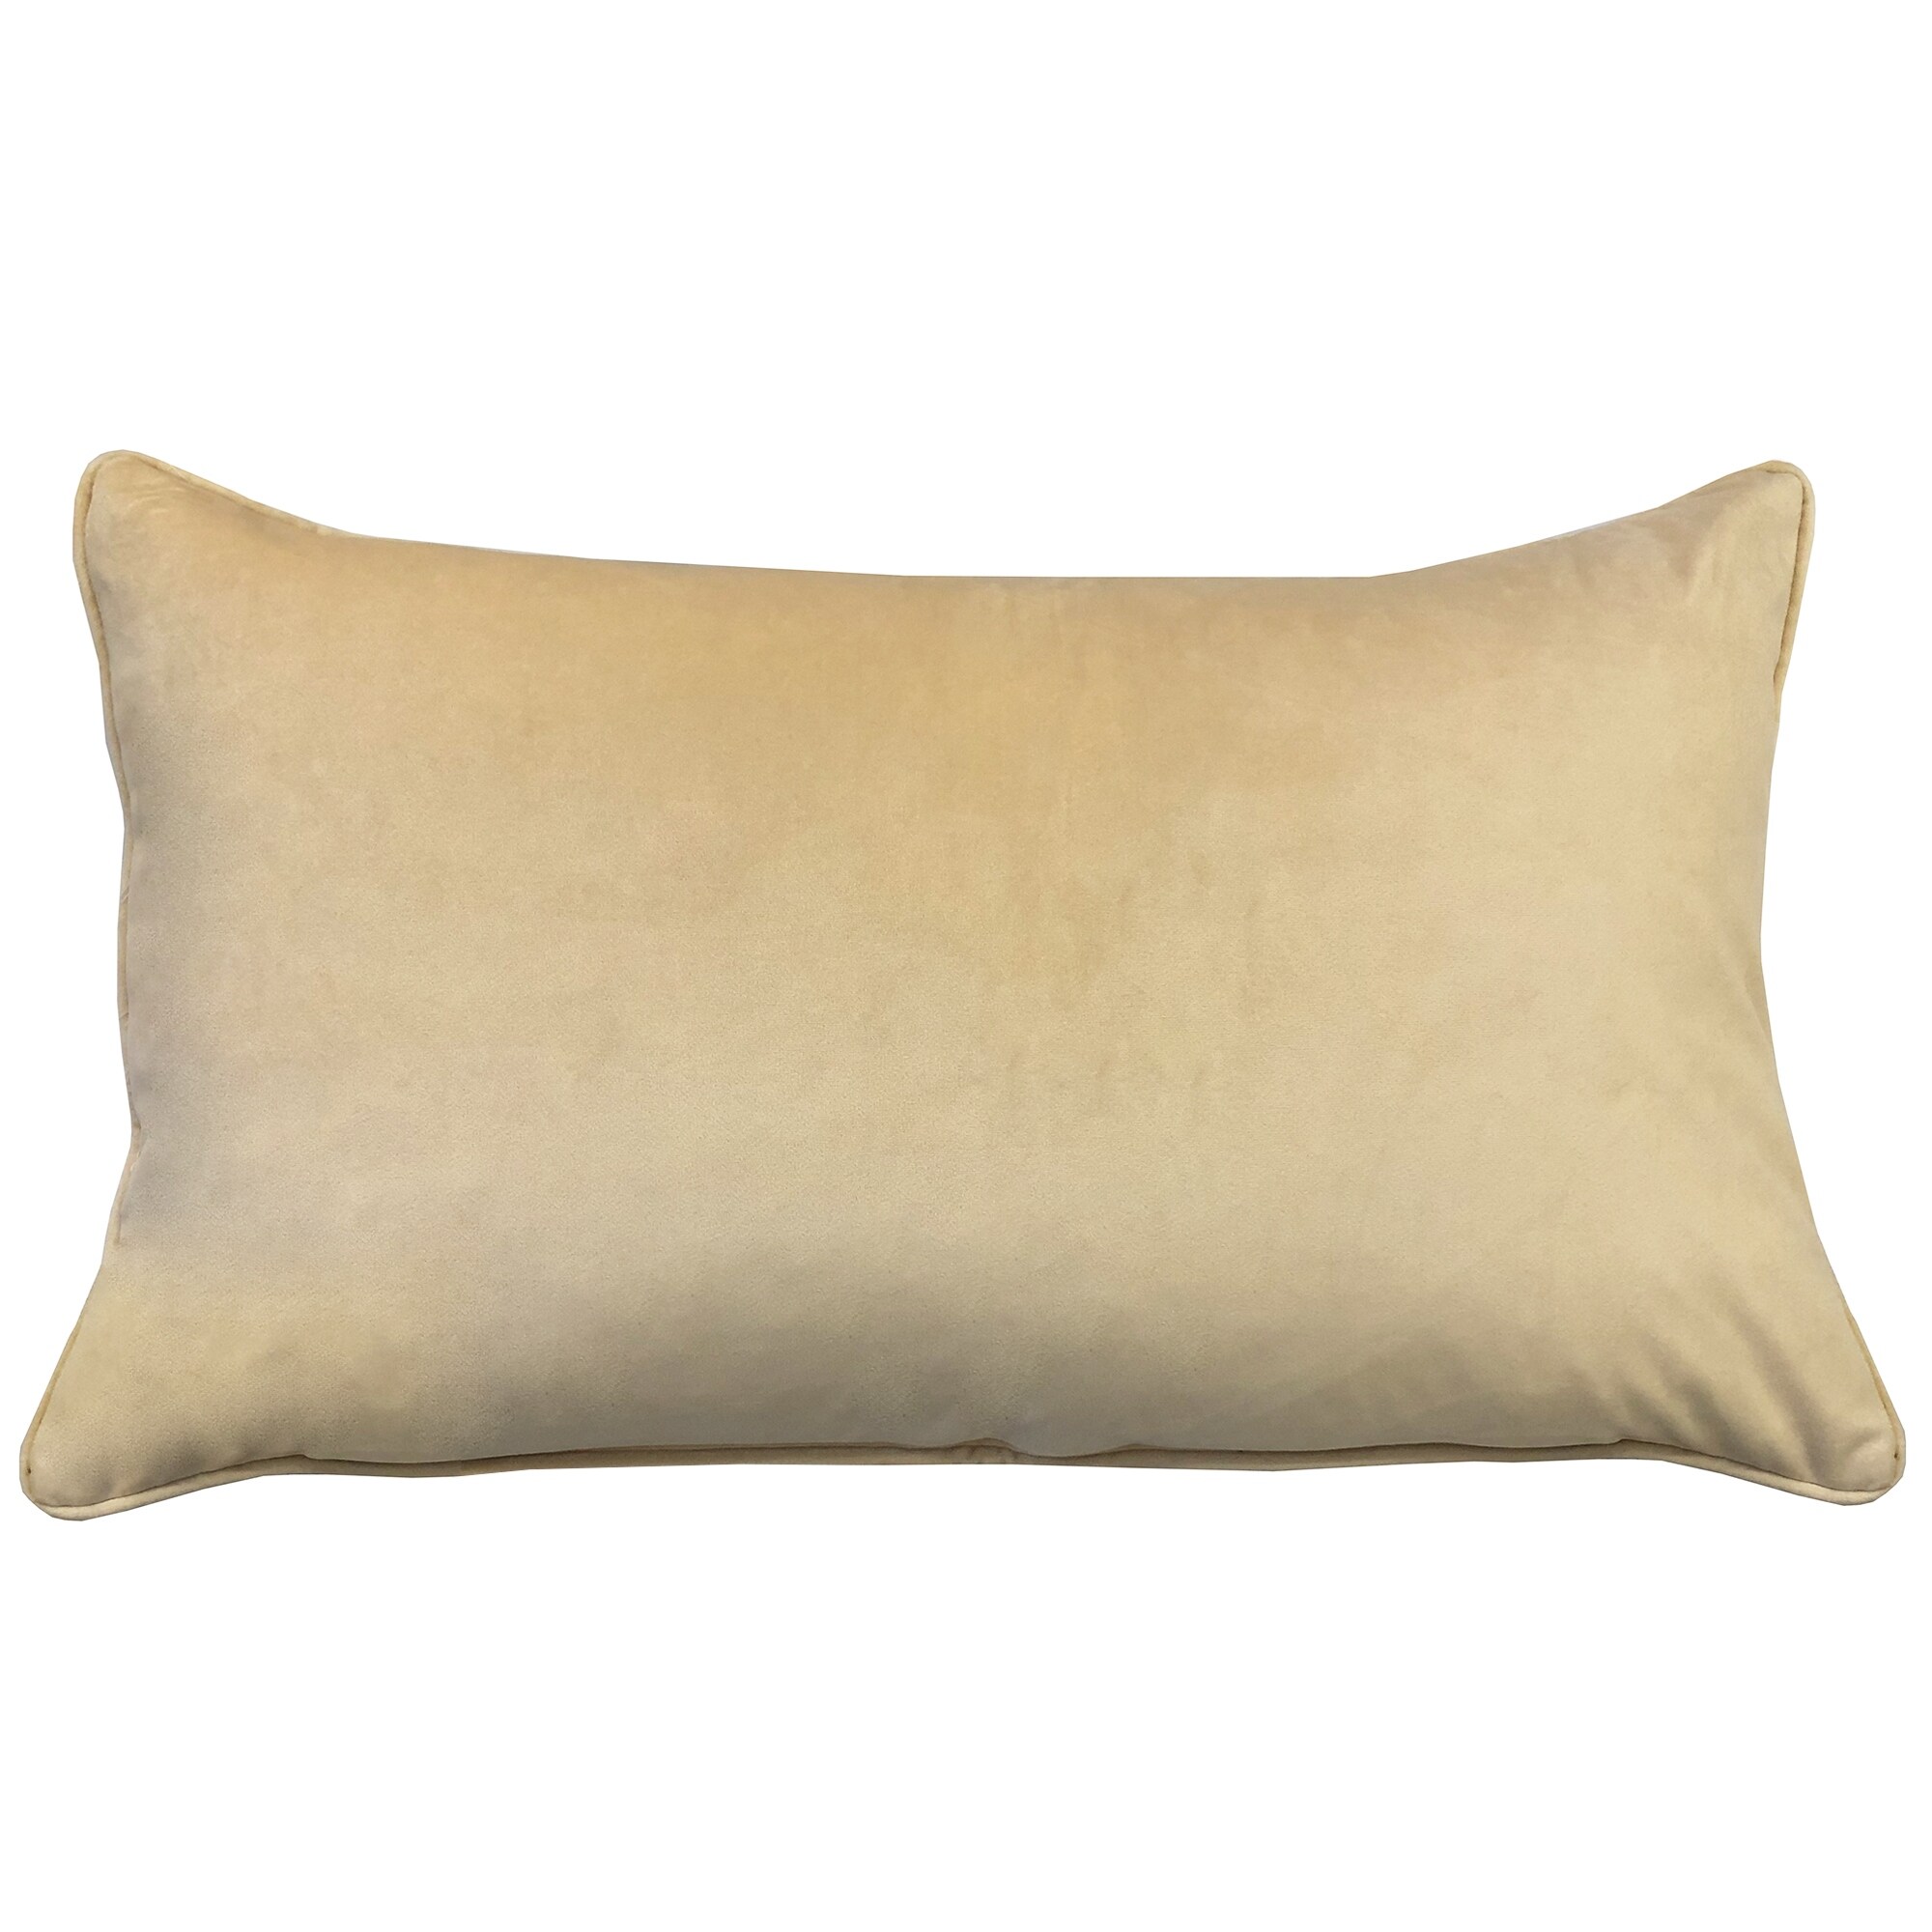 Small Taupe Lumbar Pillow - PCH13-A - STONE FEATHER ROAD